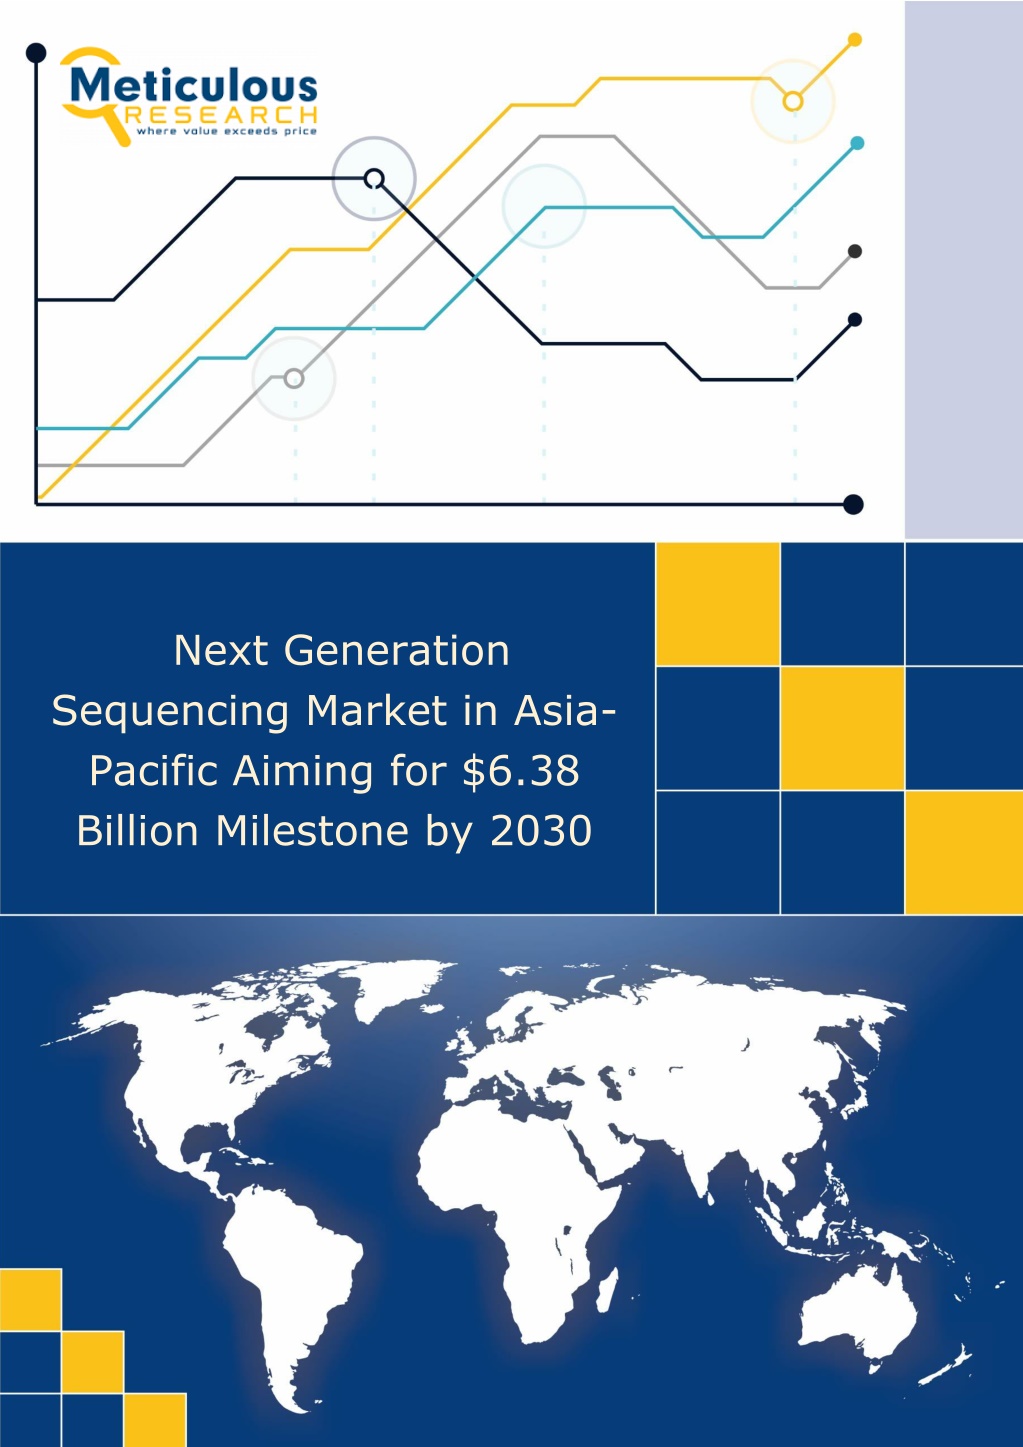 next generation sequencing market in asia pacific l.w